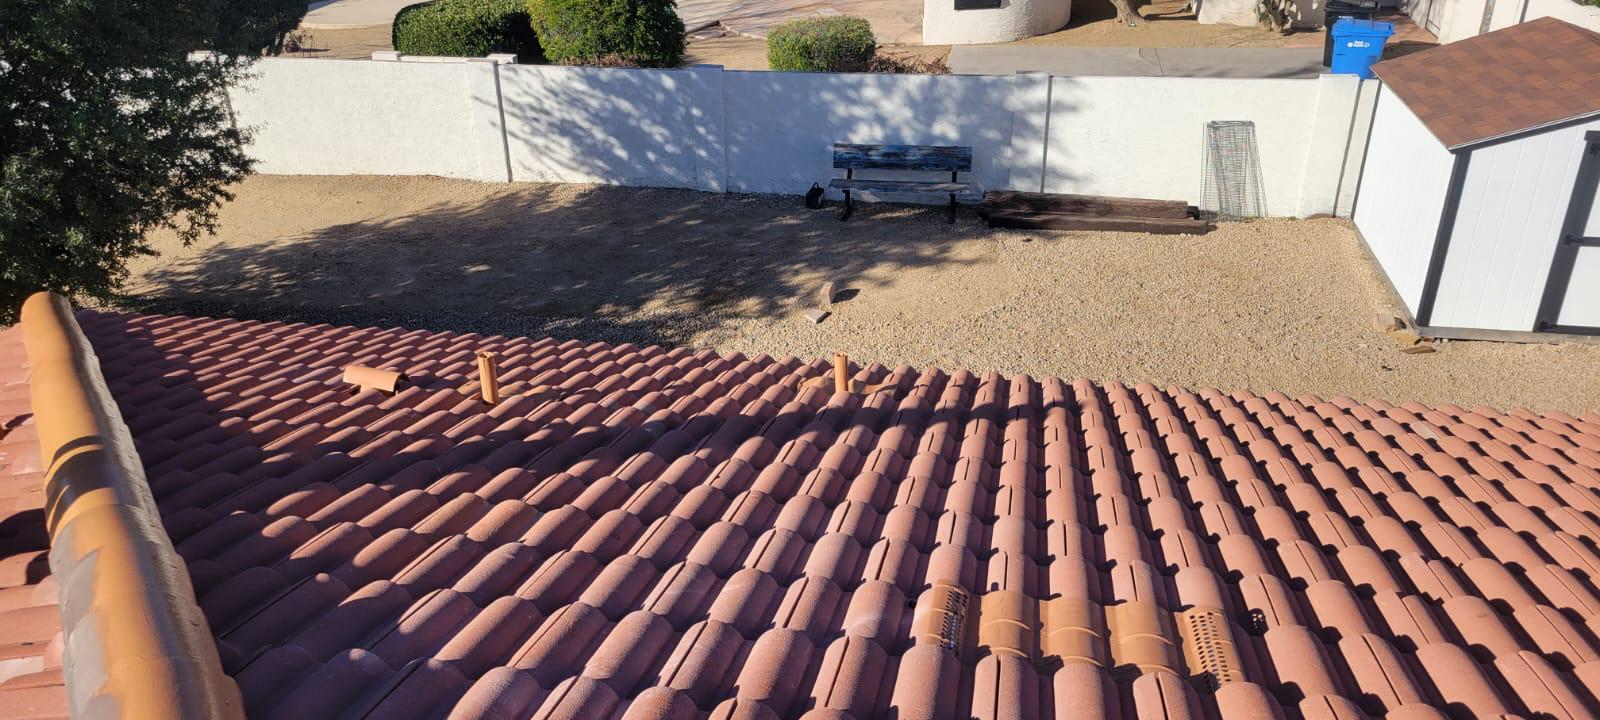 Flawless finish on a residential roof by Behmer after a tile re-felt in Glendale, Arizona.